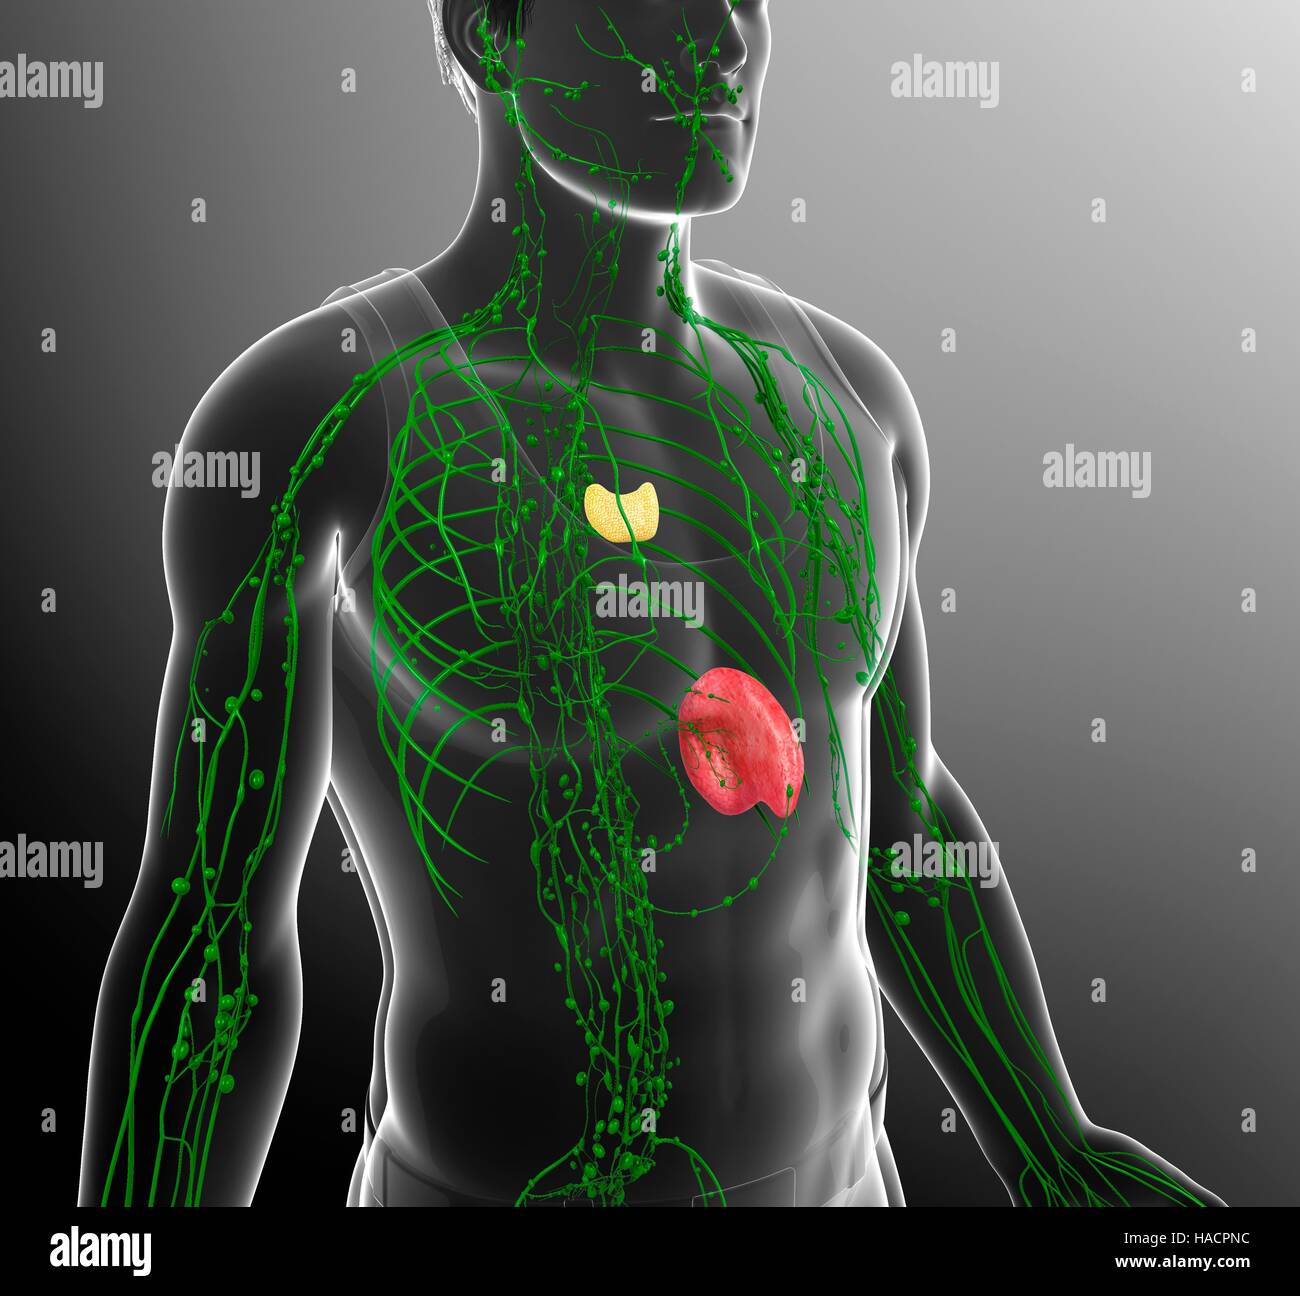 Illustration Of Male Lymphatic System Stock Photo Alamy